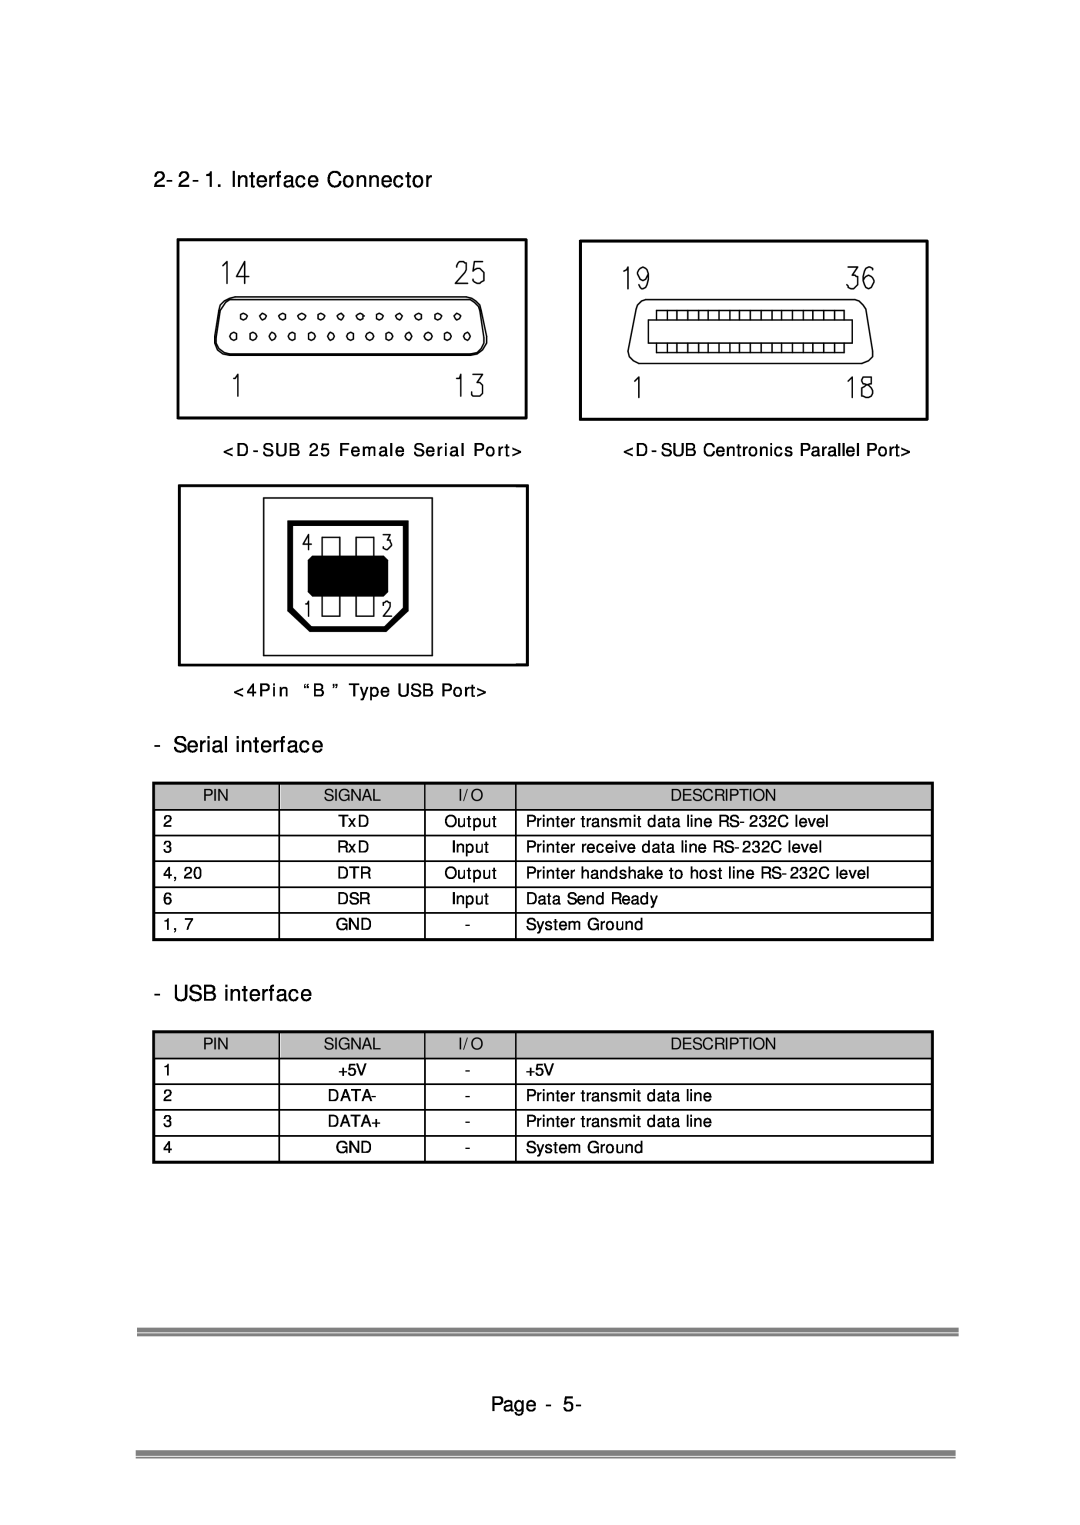 Epson RP-300, RP-310 user manual Interface Connector, Serial interface, USB interface, Page, D -SUB 25 Female Serial Port 